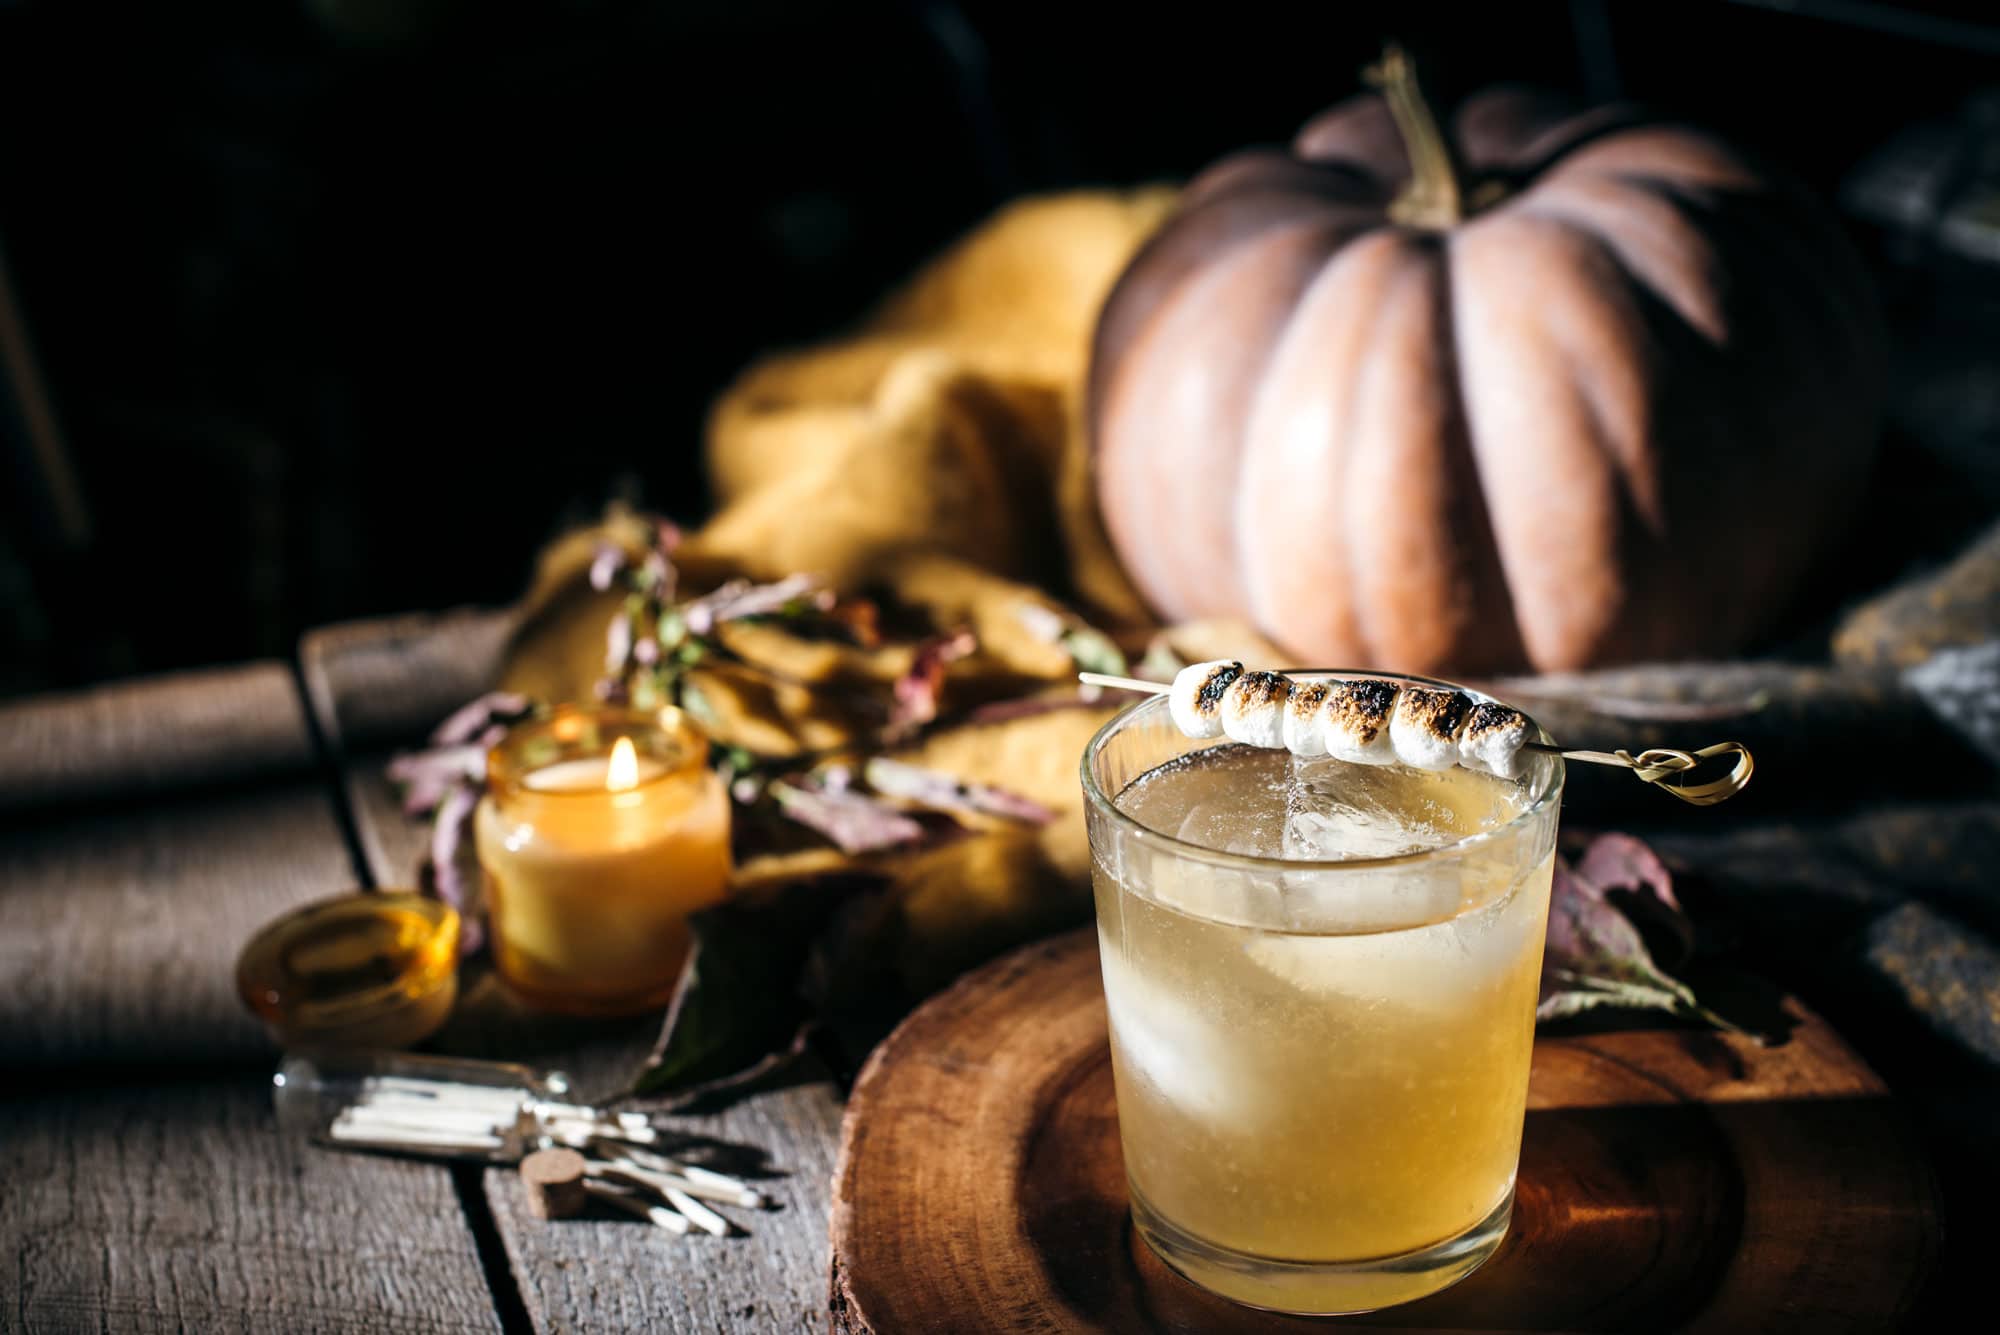 Vodka Cocktail drink on a wooden table with fall decorations